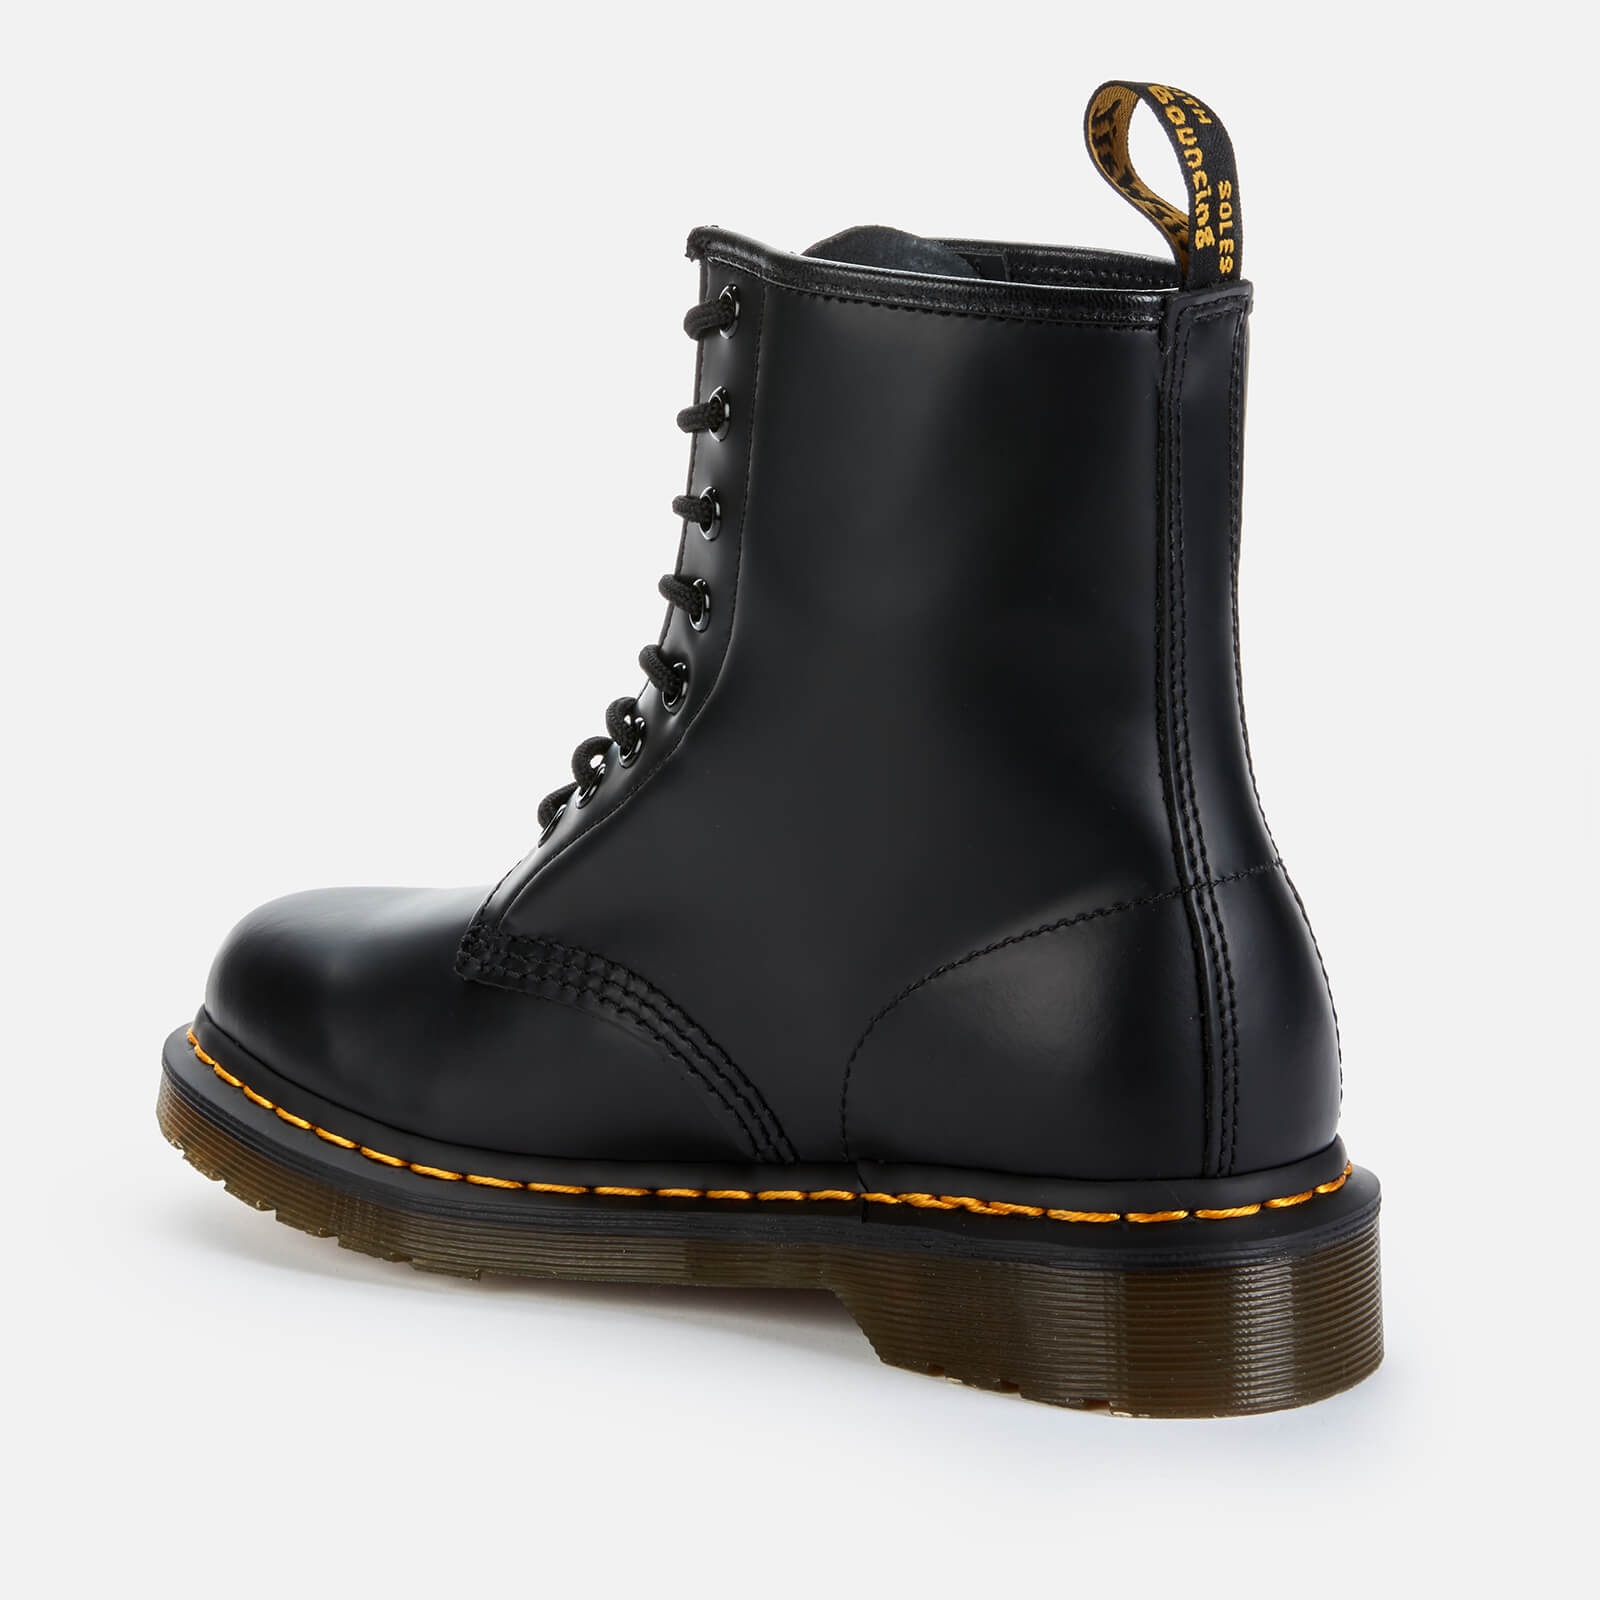 Dr. Martens 1460 Smooth Leather 8-Eye Boots - Black - 3